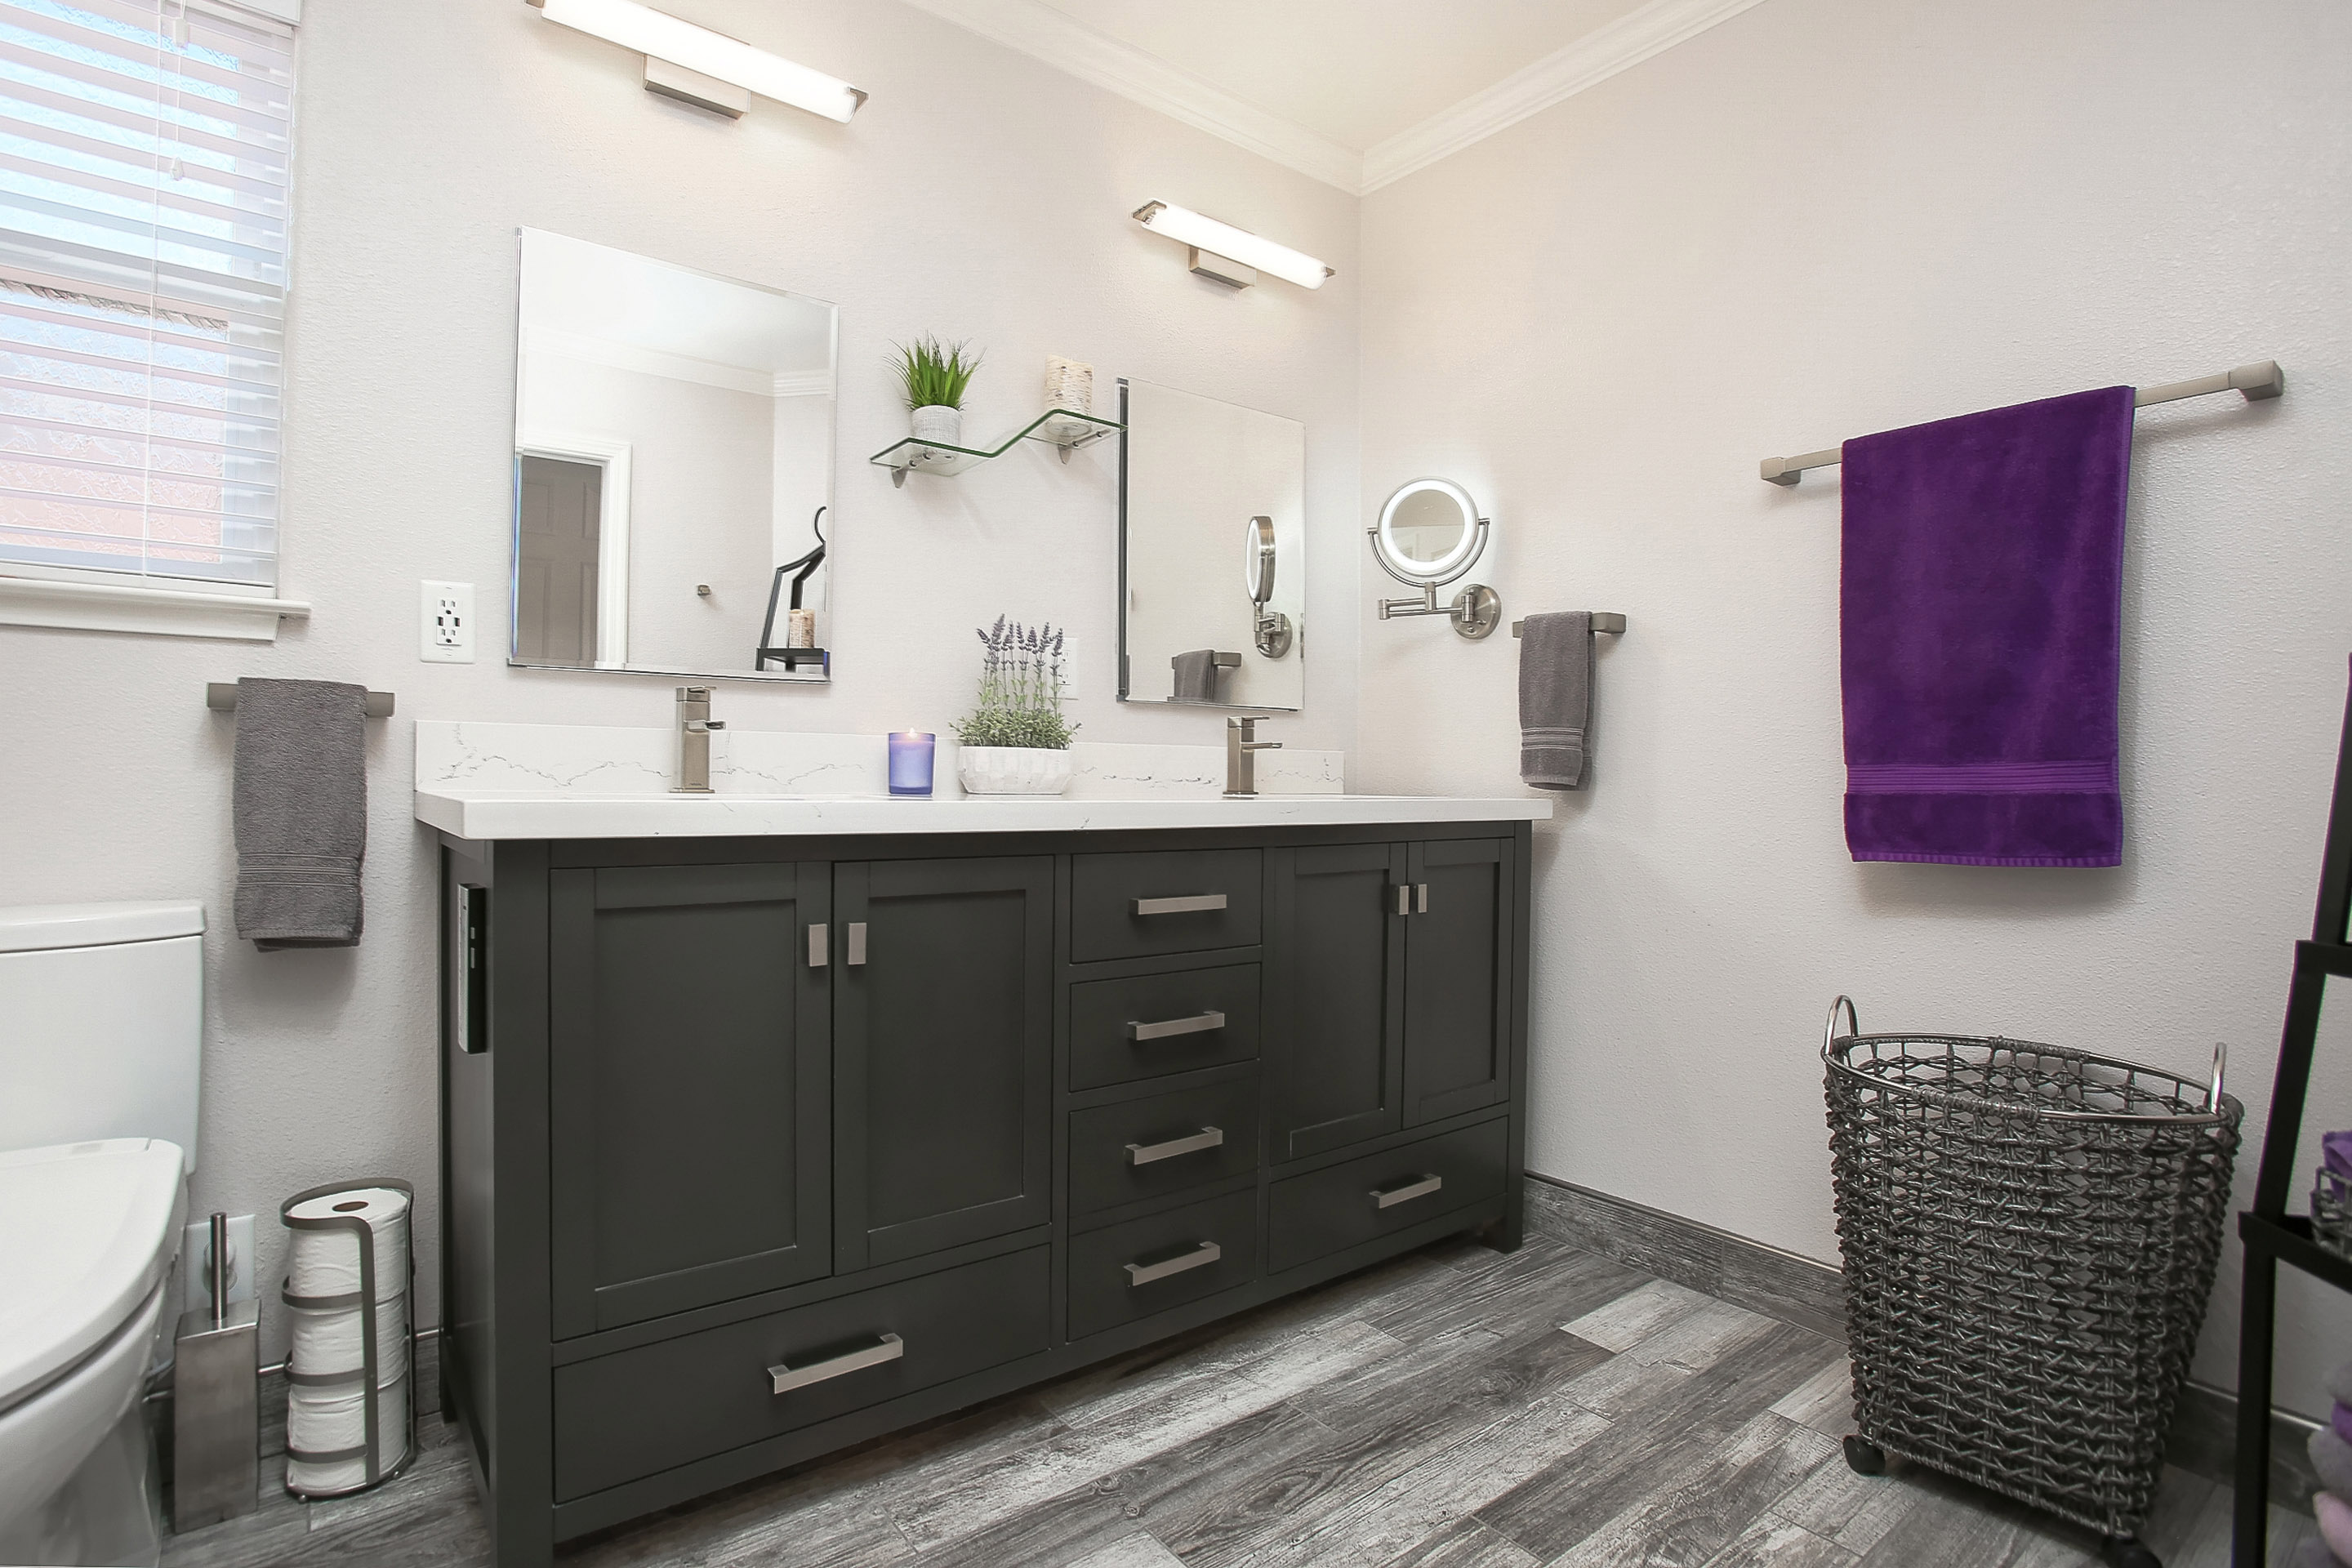 A previously crammed half bath transformed into a spacious place for pampering.